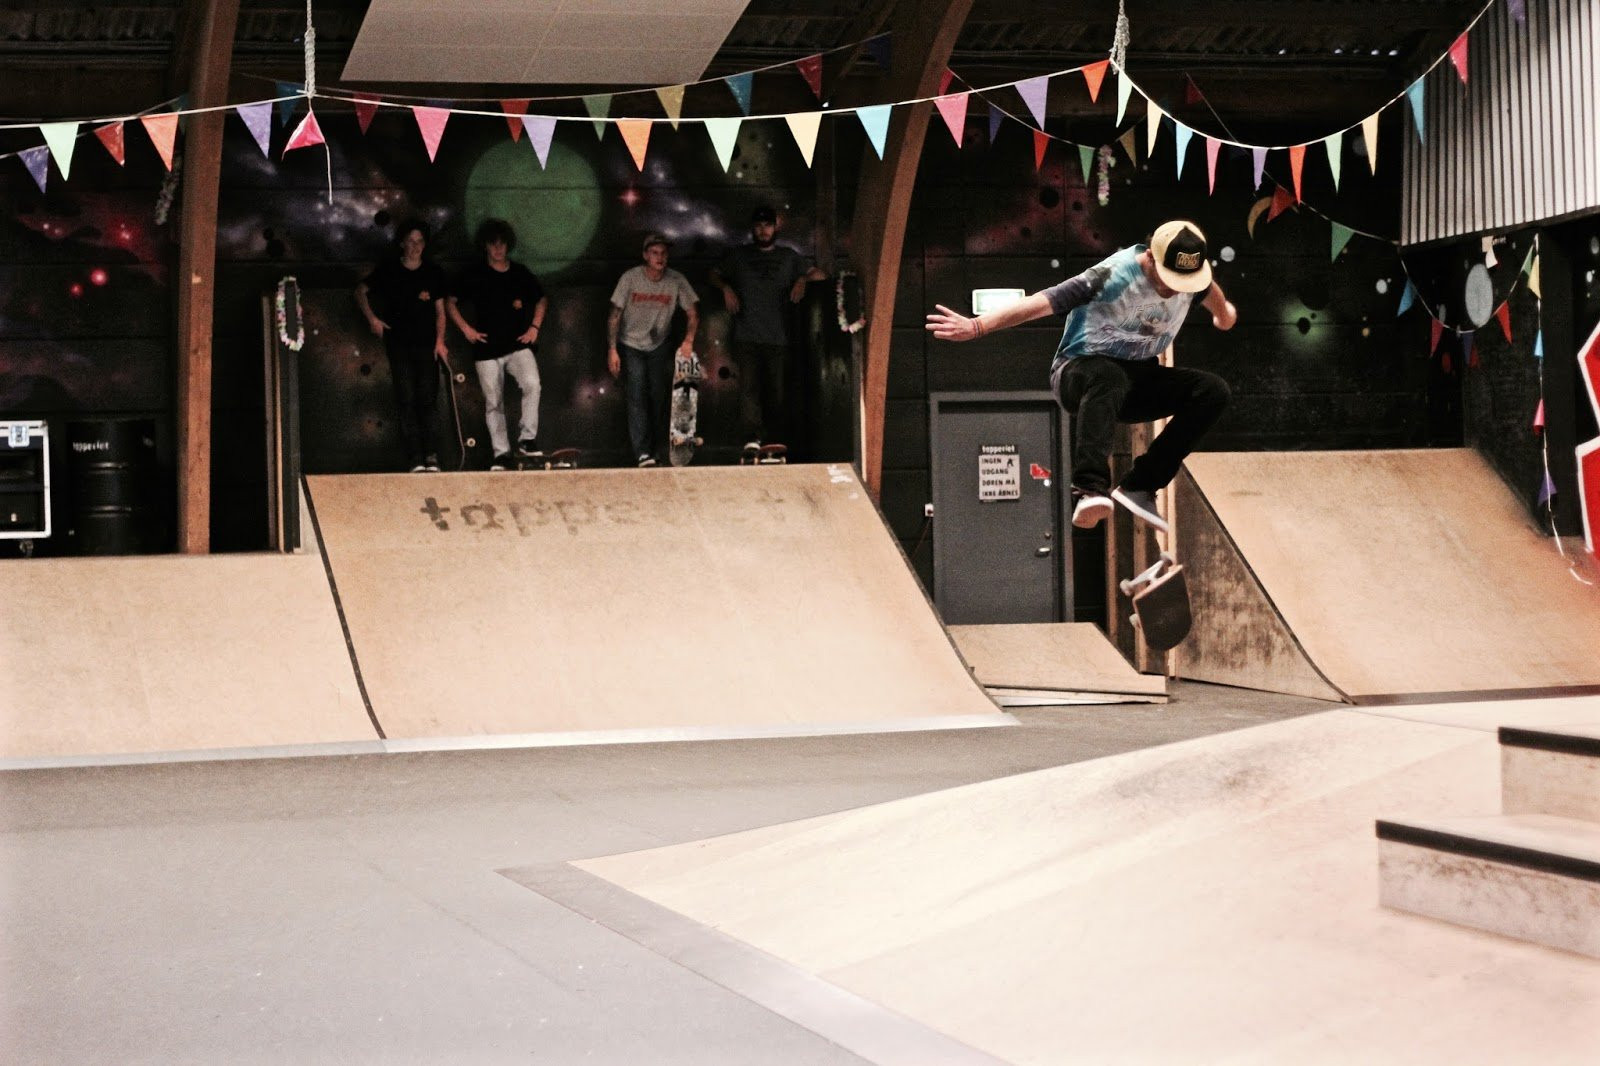 The skatepark at the yellow hall is the indoor skatepark of youth cultural centre, Tapperiet. It consists of all the obstacles one could wish for. The hall is decorated and designed with a good flow in mind. The central element of the hall’s street course is a podium consisting of:Quarterpipe-wallrides, pyramide-hip, bank-to-ledges in two heights, 5 steps and a hubba-ledge made of granite. In addition, there are banks, quarter pipes and bank-to-wall as well as flat curbs and rails. Besides the street course, the skatepark at the yellow hall has a mini ramp which is 1 metre high with a soft transition. The mini ramp is suited for both beginners and more experienced skaters who wish to learn new tricks.The hall also has a common room with couches, a kitchen and a bathroom available.Skating at the hall is free!The opening hours of the hall varies. You can see them for one month at a time on the hall’s facebook page:https://www.facebook.com/skategulehalkoege